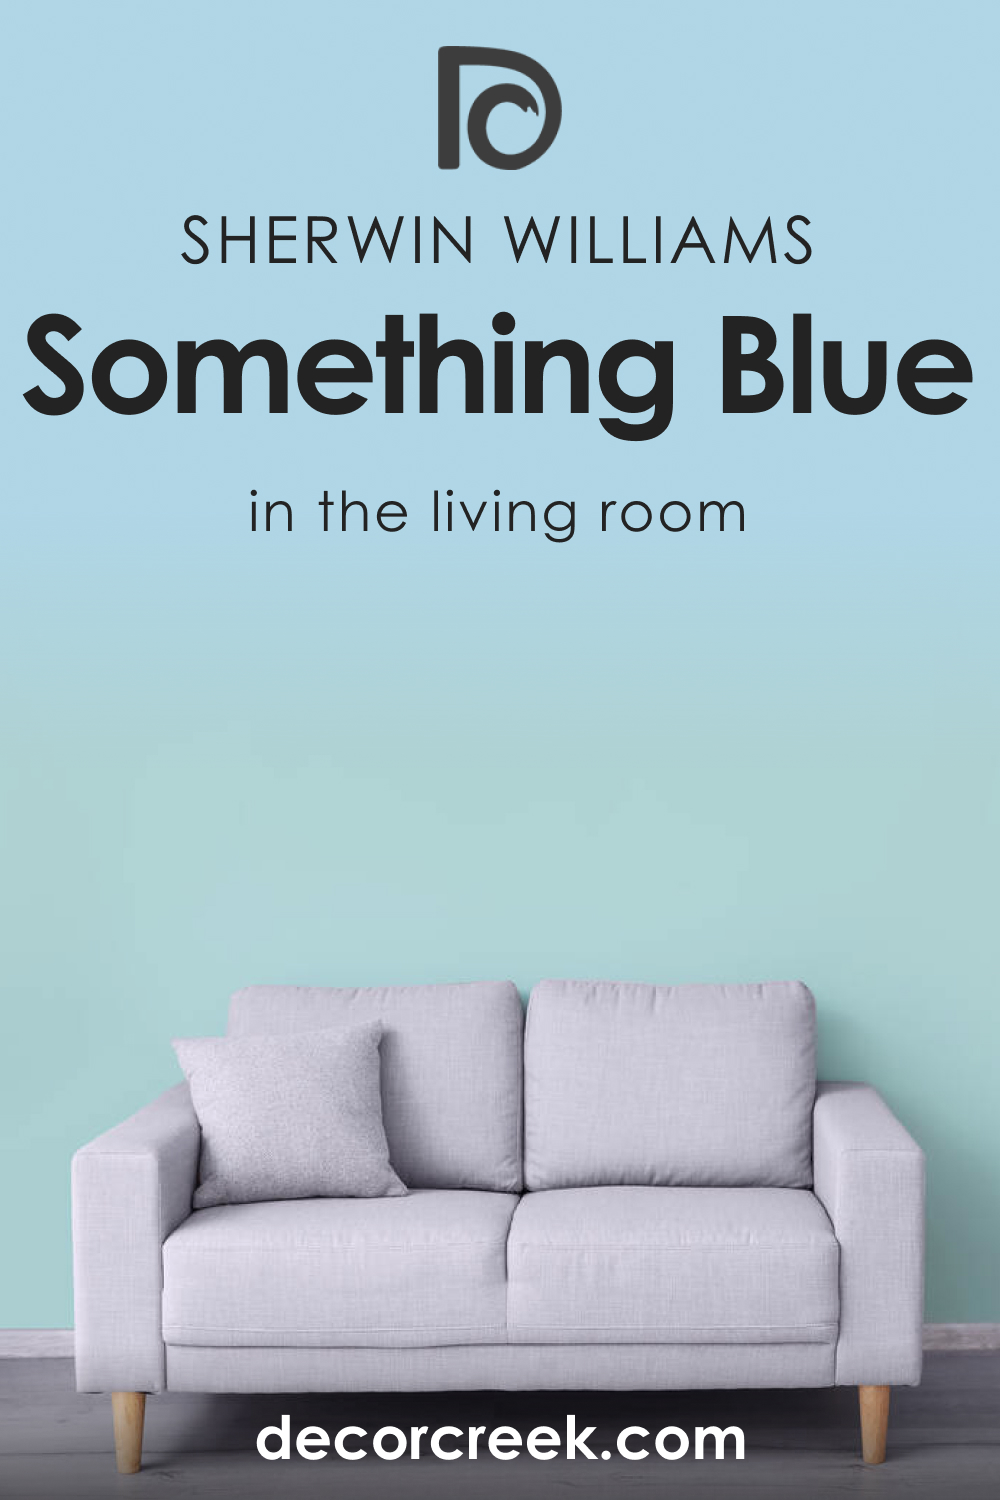 How to Use SW 6800 Something Blue in the Living Room?